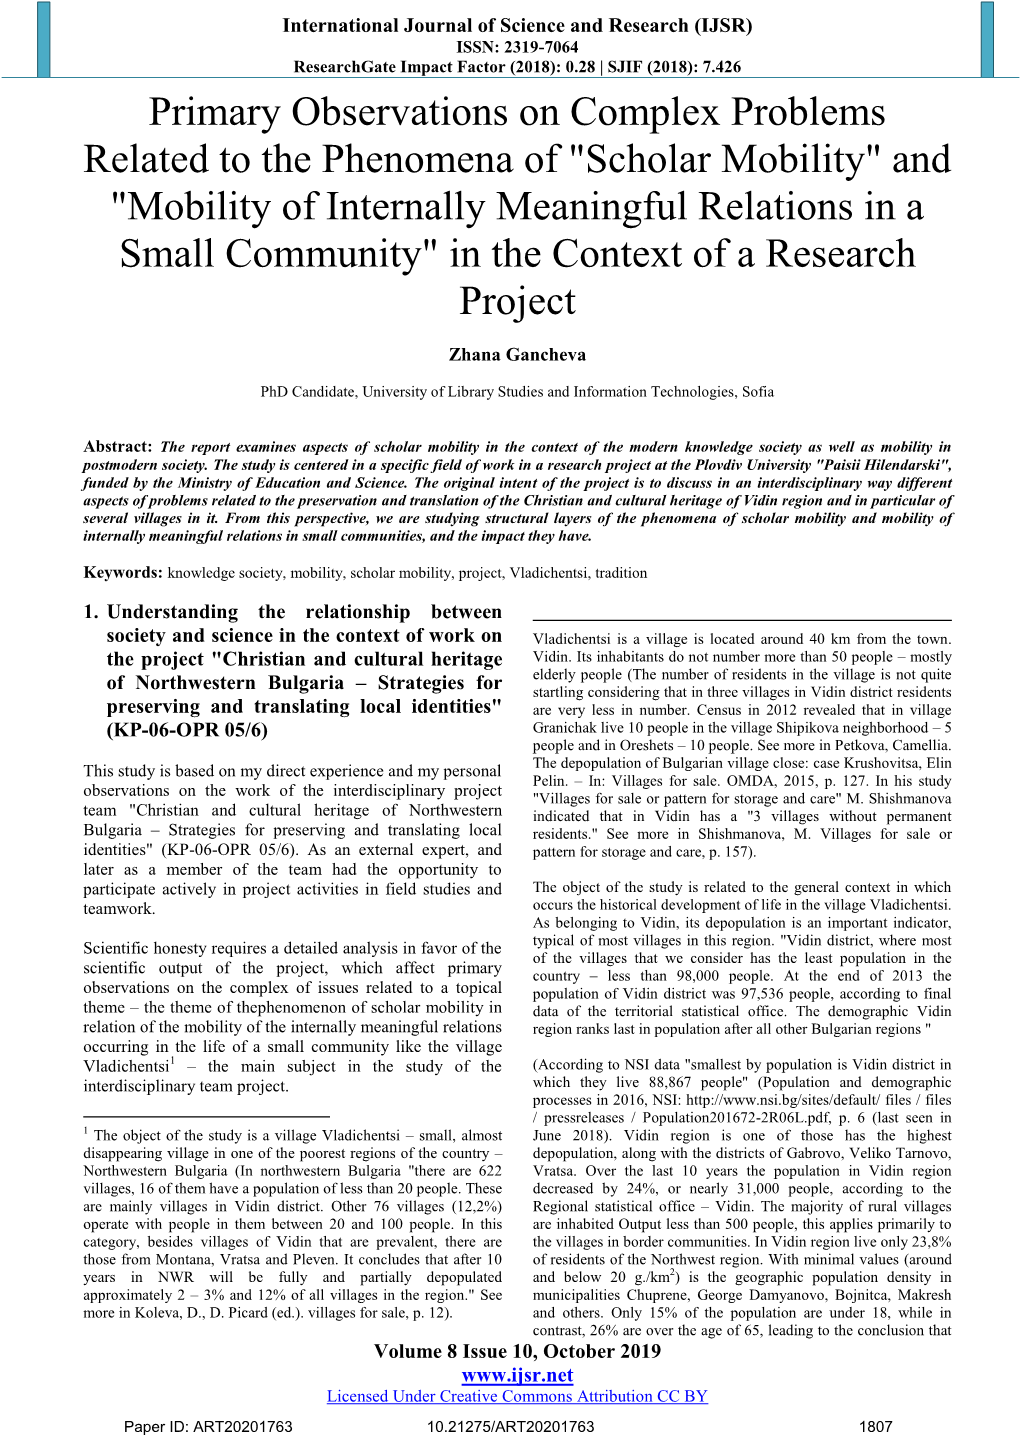 Mobility of Internally Meaningful Relations in a Small Community" in the Context of a Research Project